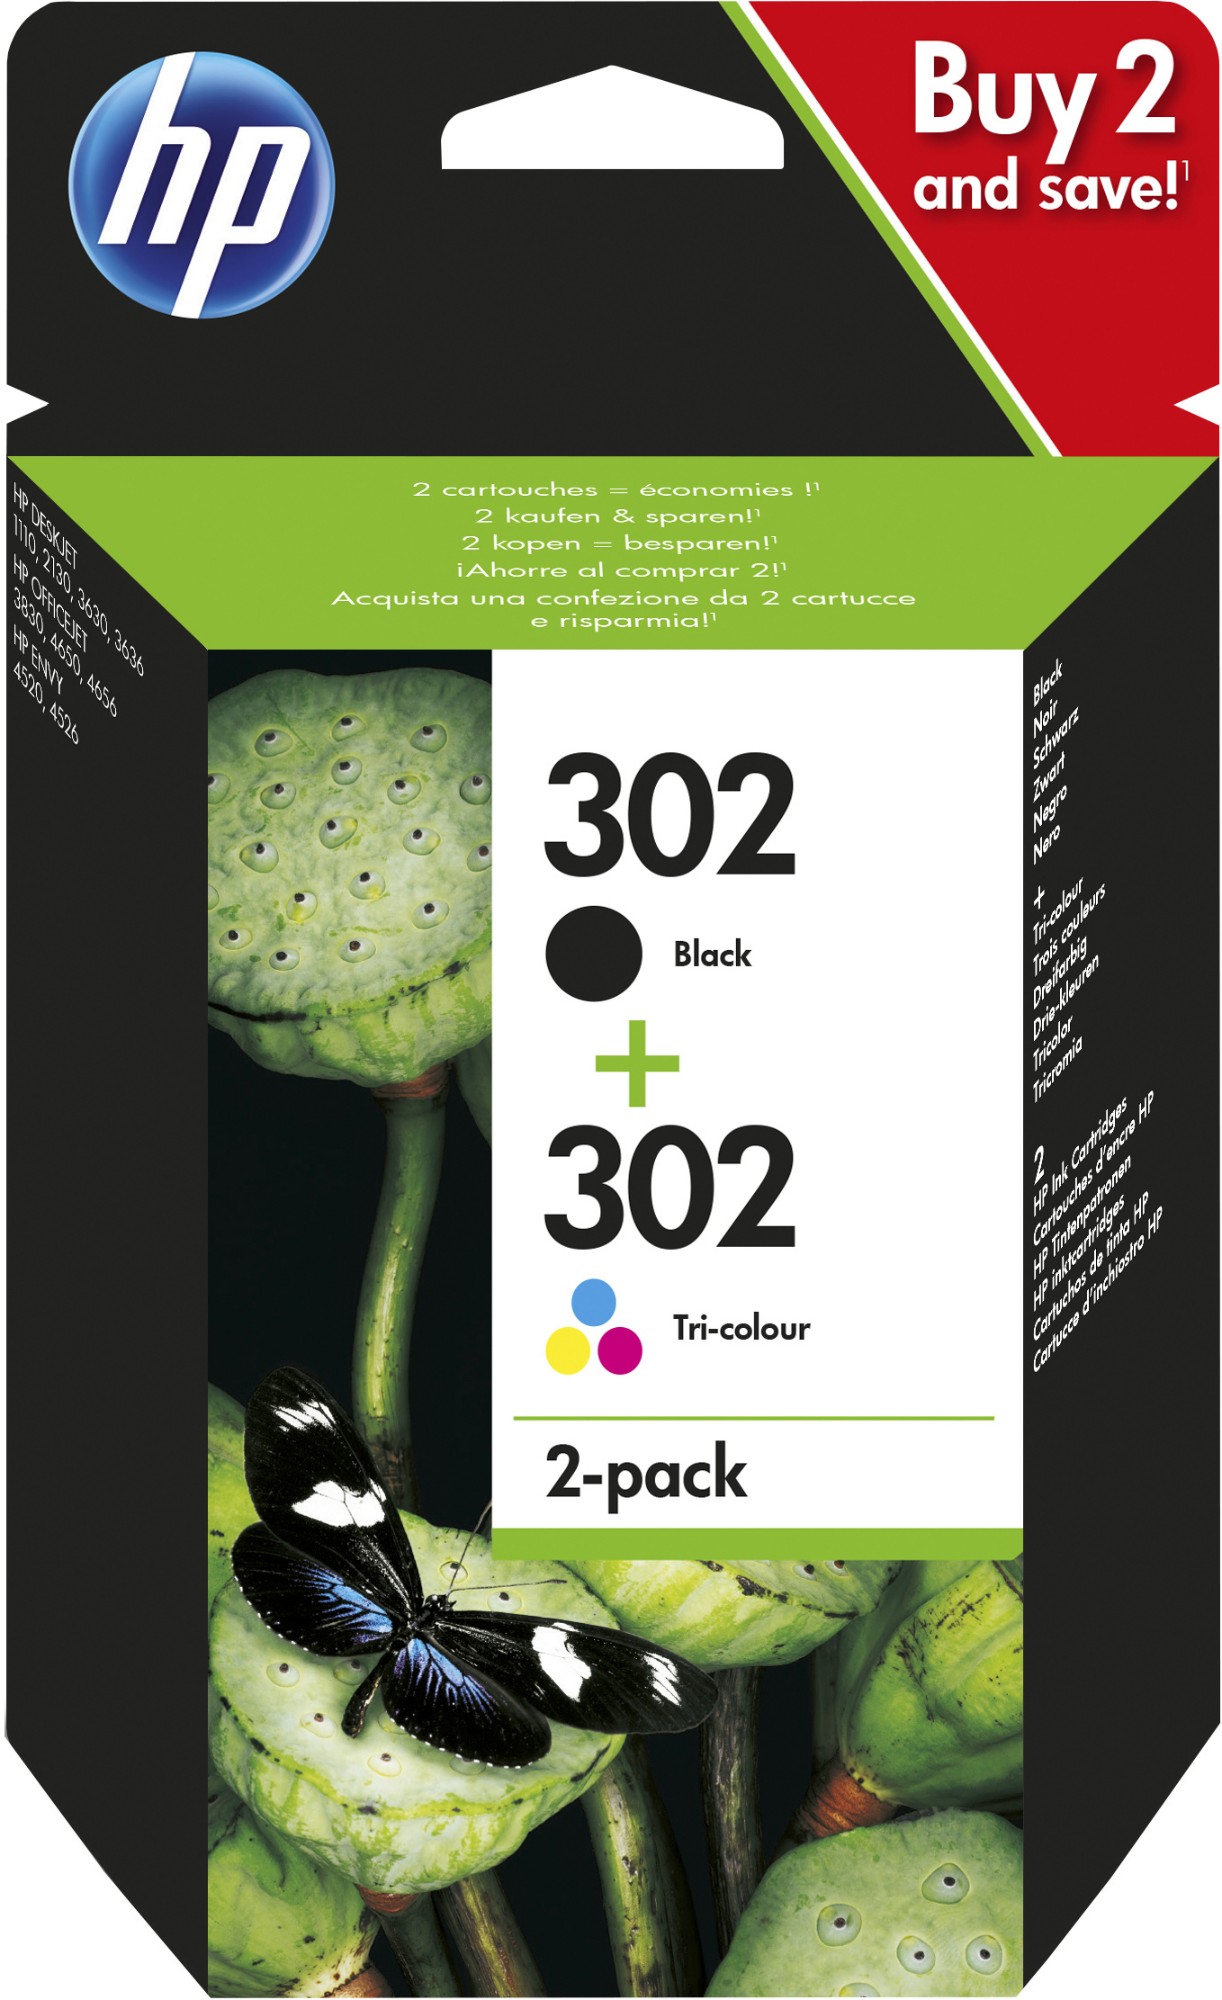 HP 302 Ink Cartridges Black and Tri-Colour CMY (2 Pack) X4D37AE